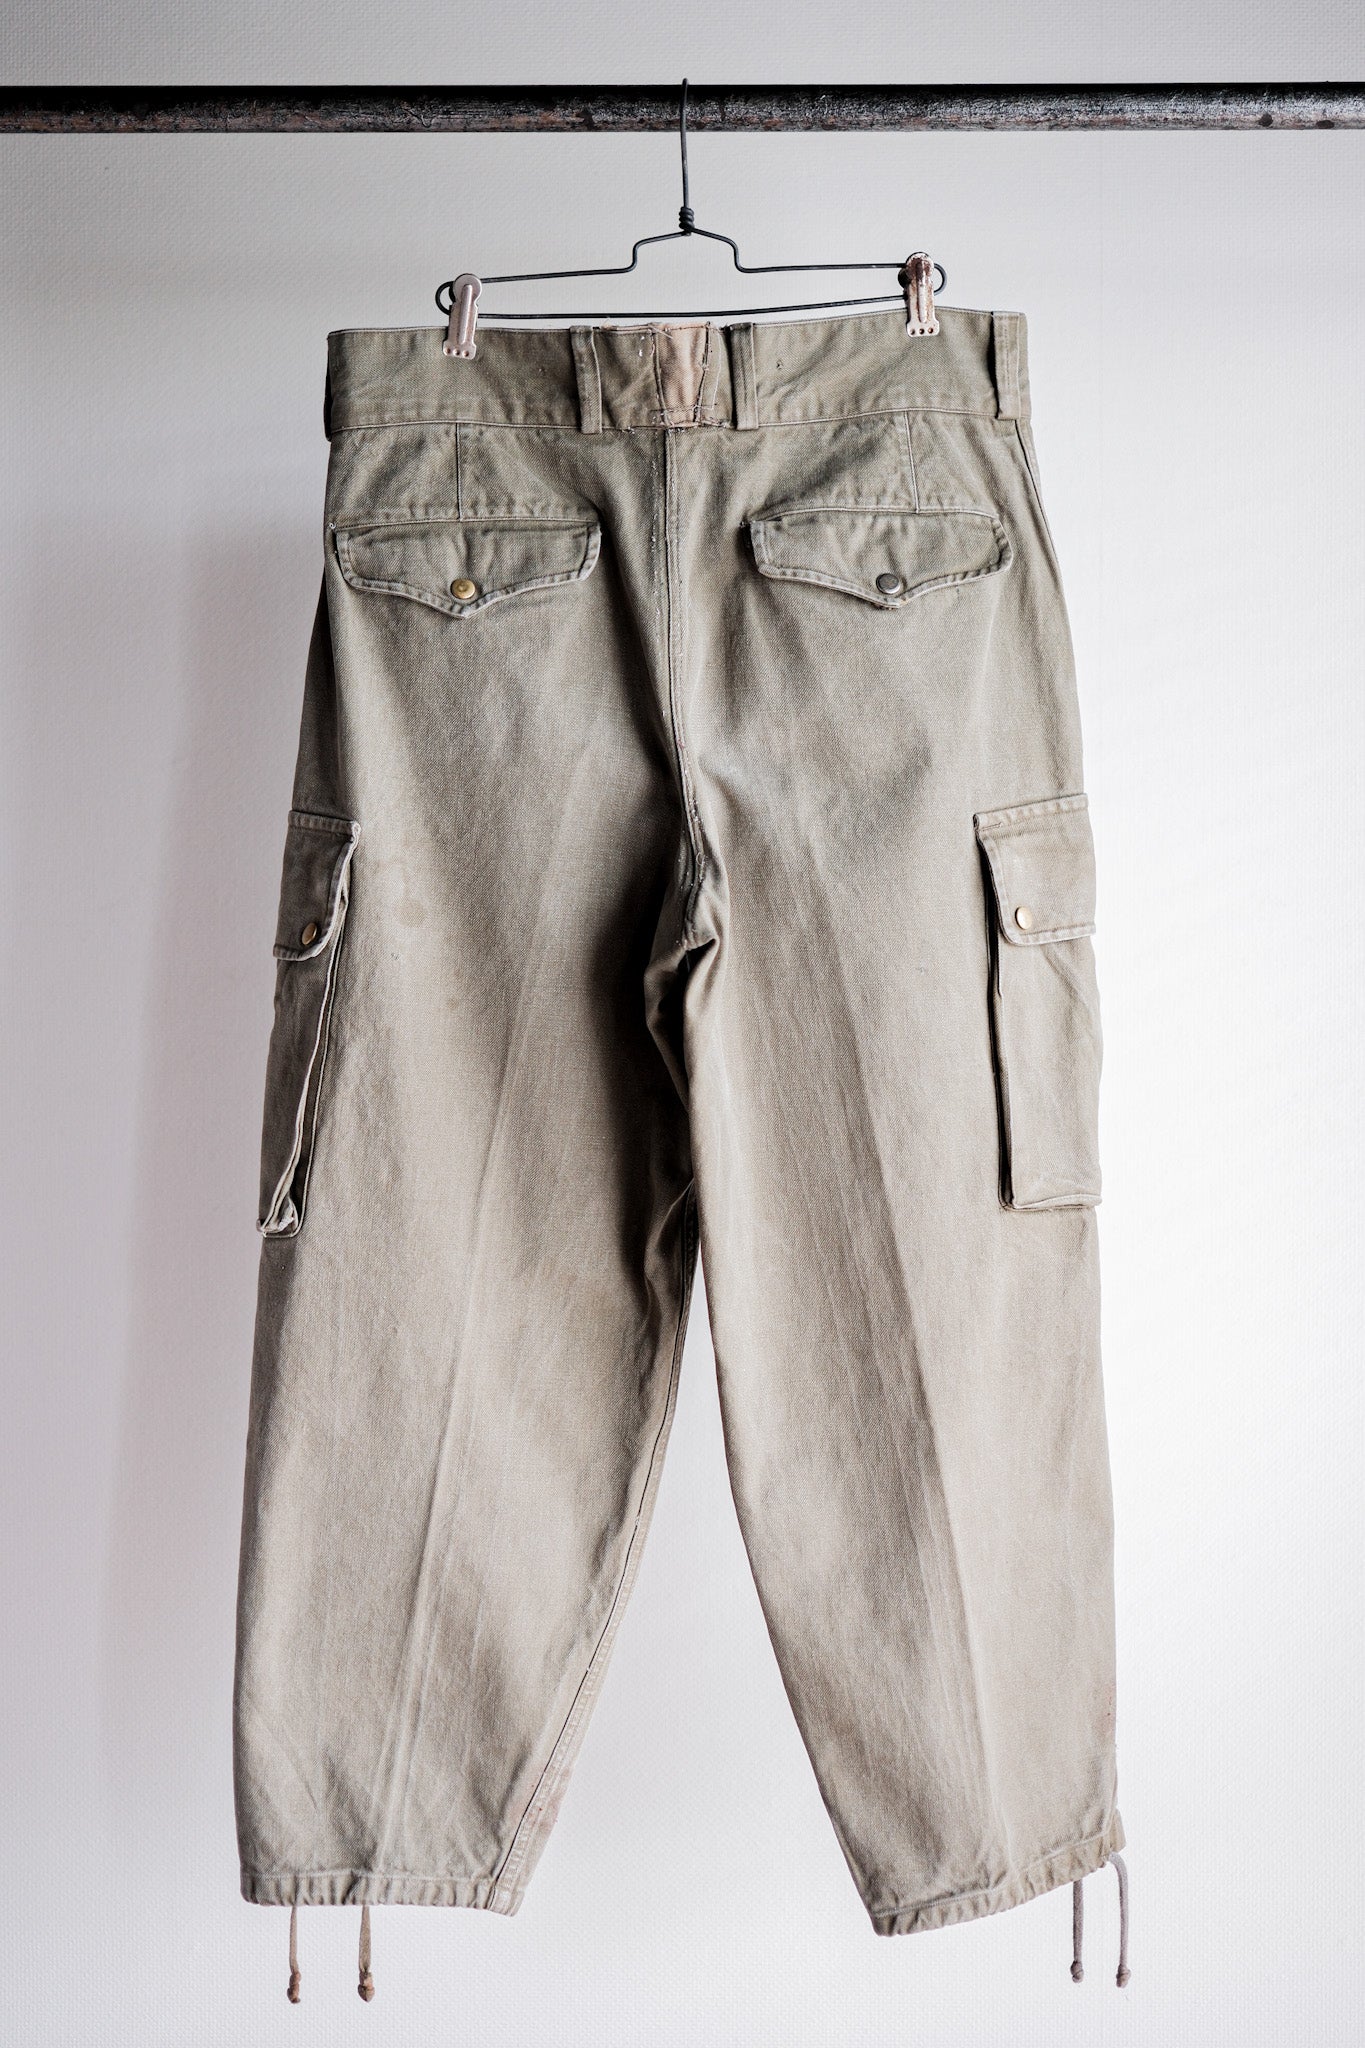 [~ 40's] Army Tap47 Pants paratrooper "1er type"